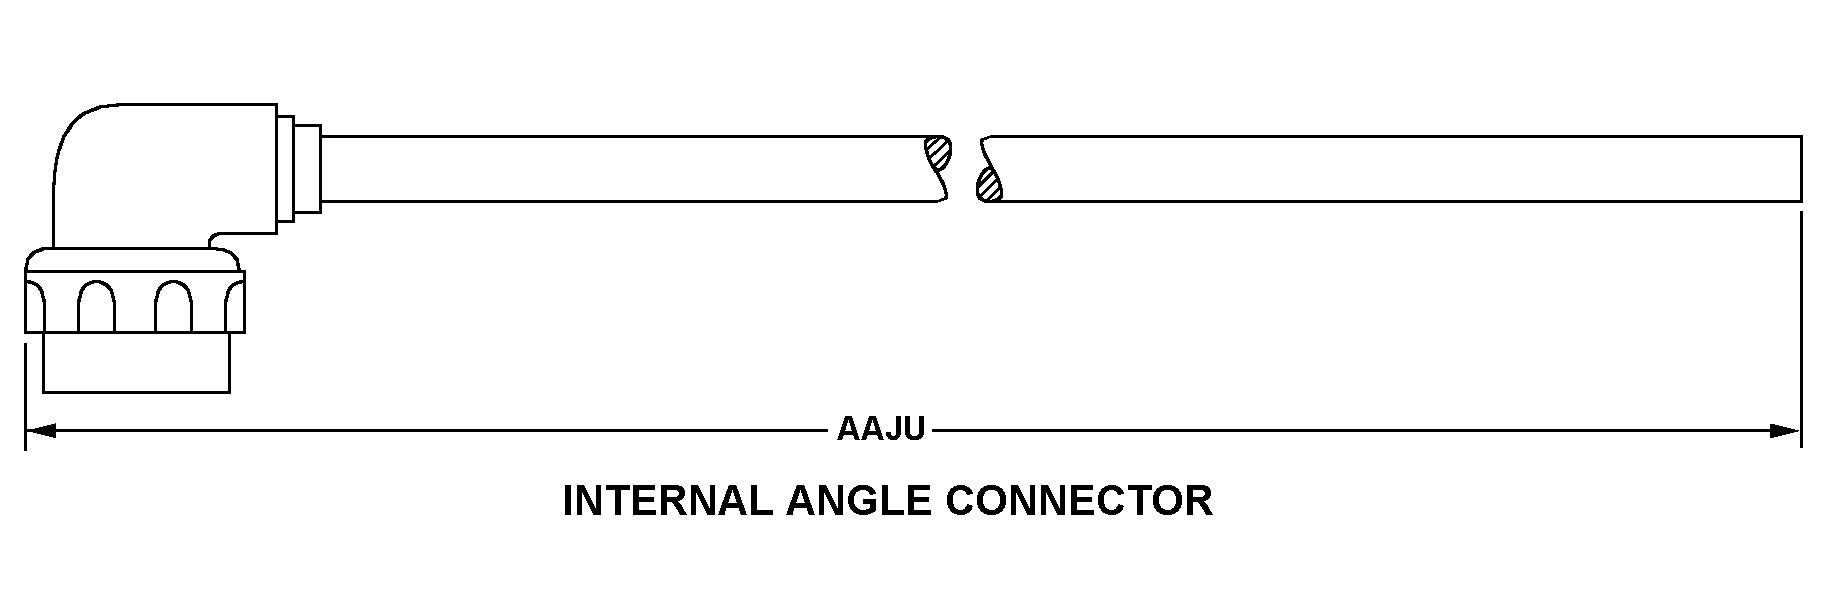 INTERNAL ANGLE CONNECTOR style nsn 5995-00-009-7433